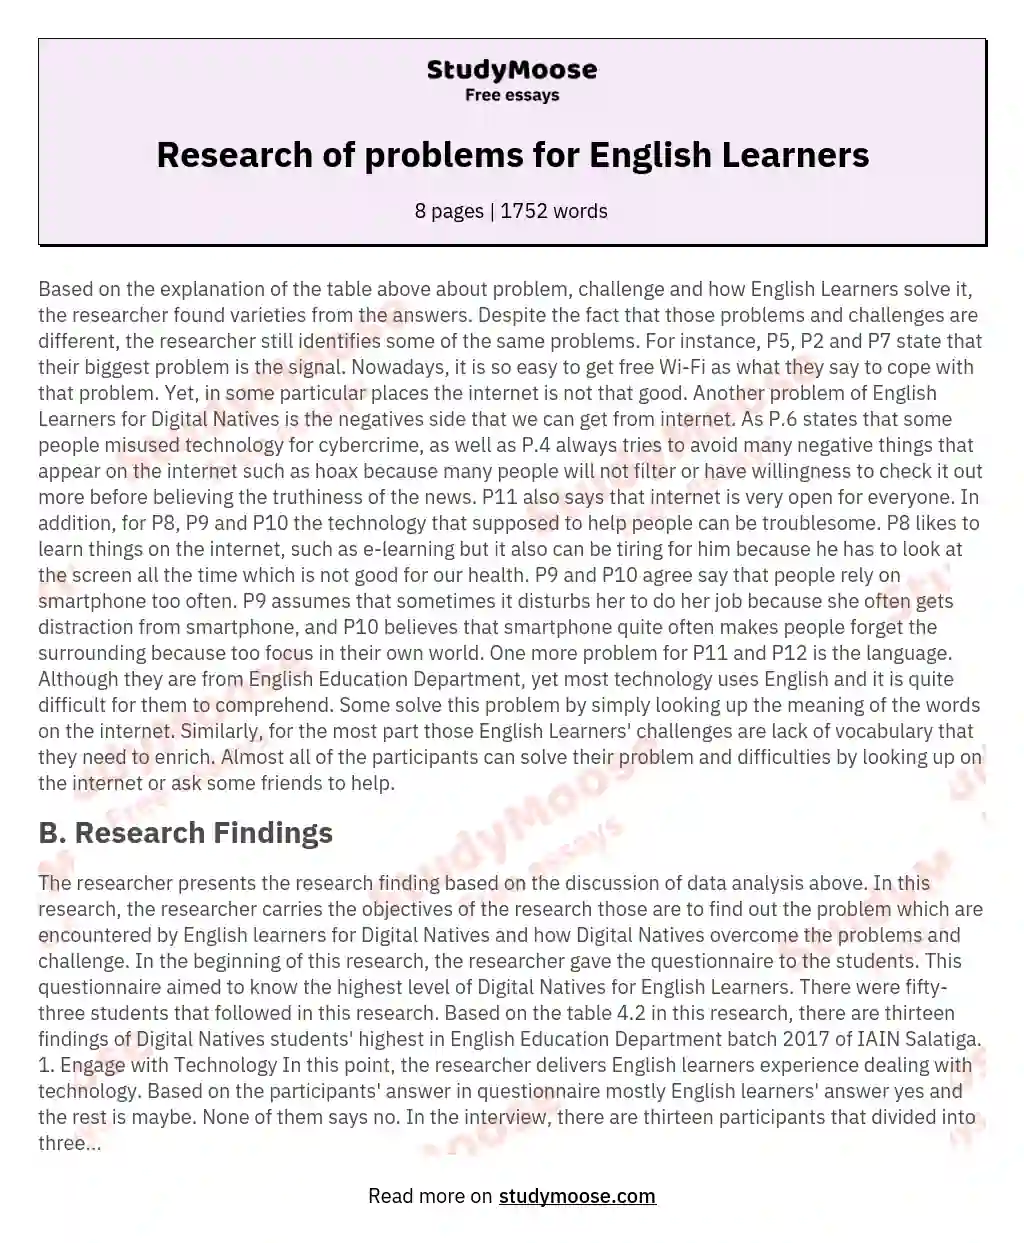 Research of problems for English Learners essay